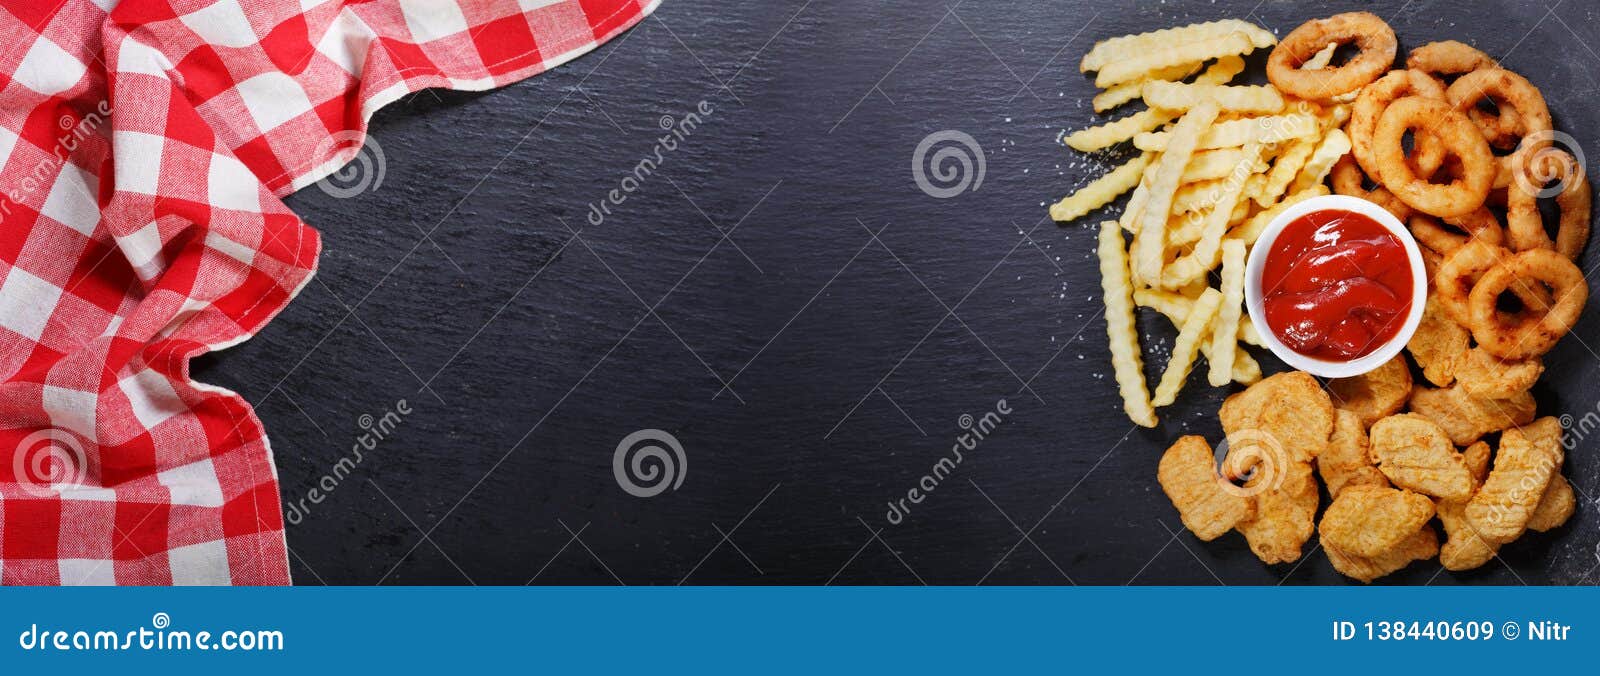 Fast food products: onion rings, french fries and chicken nuggets on dark table, top view